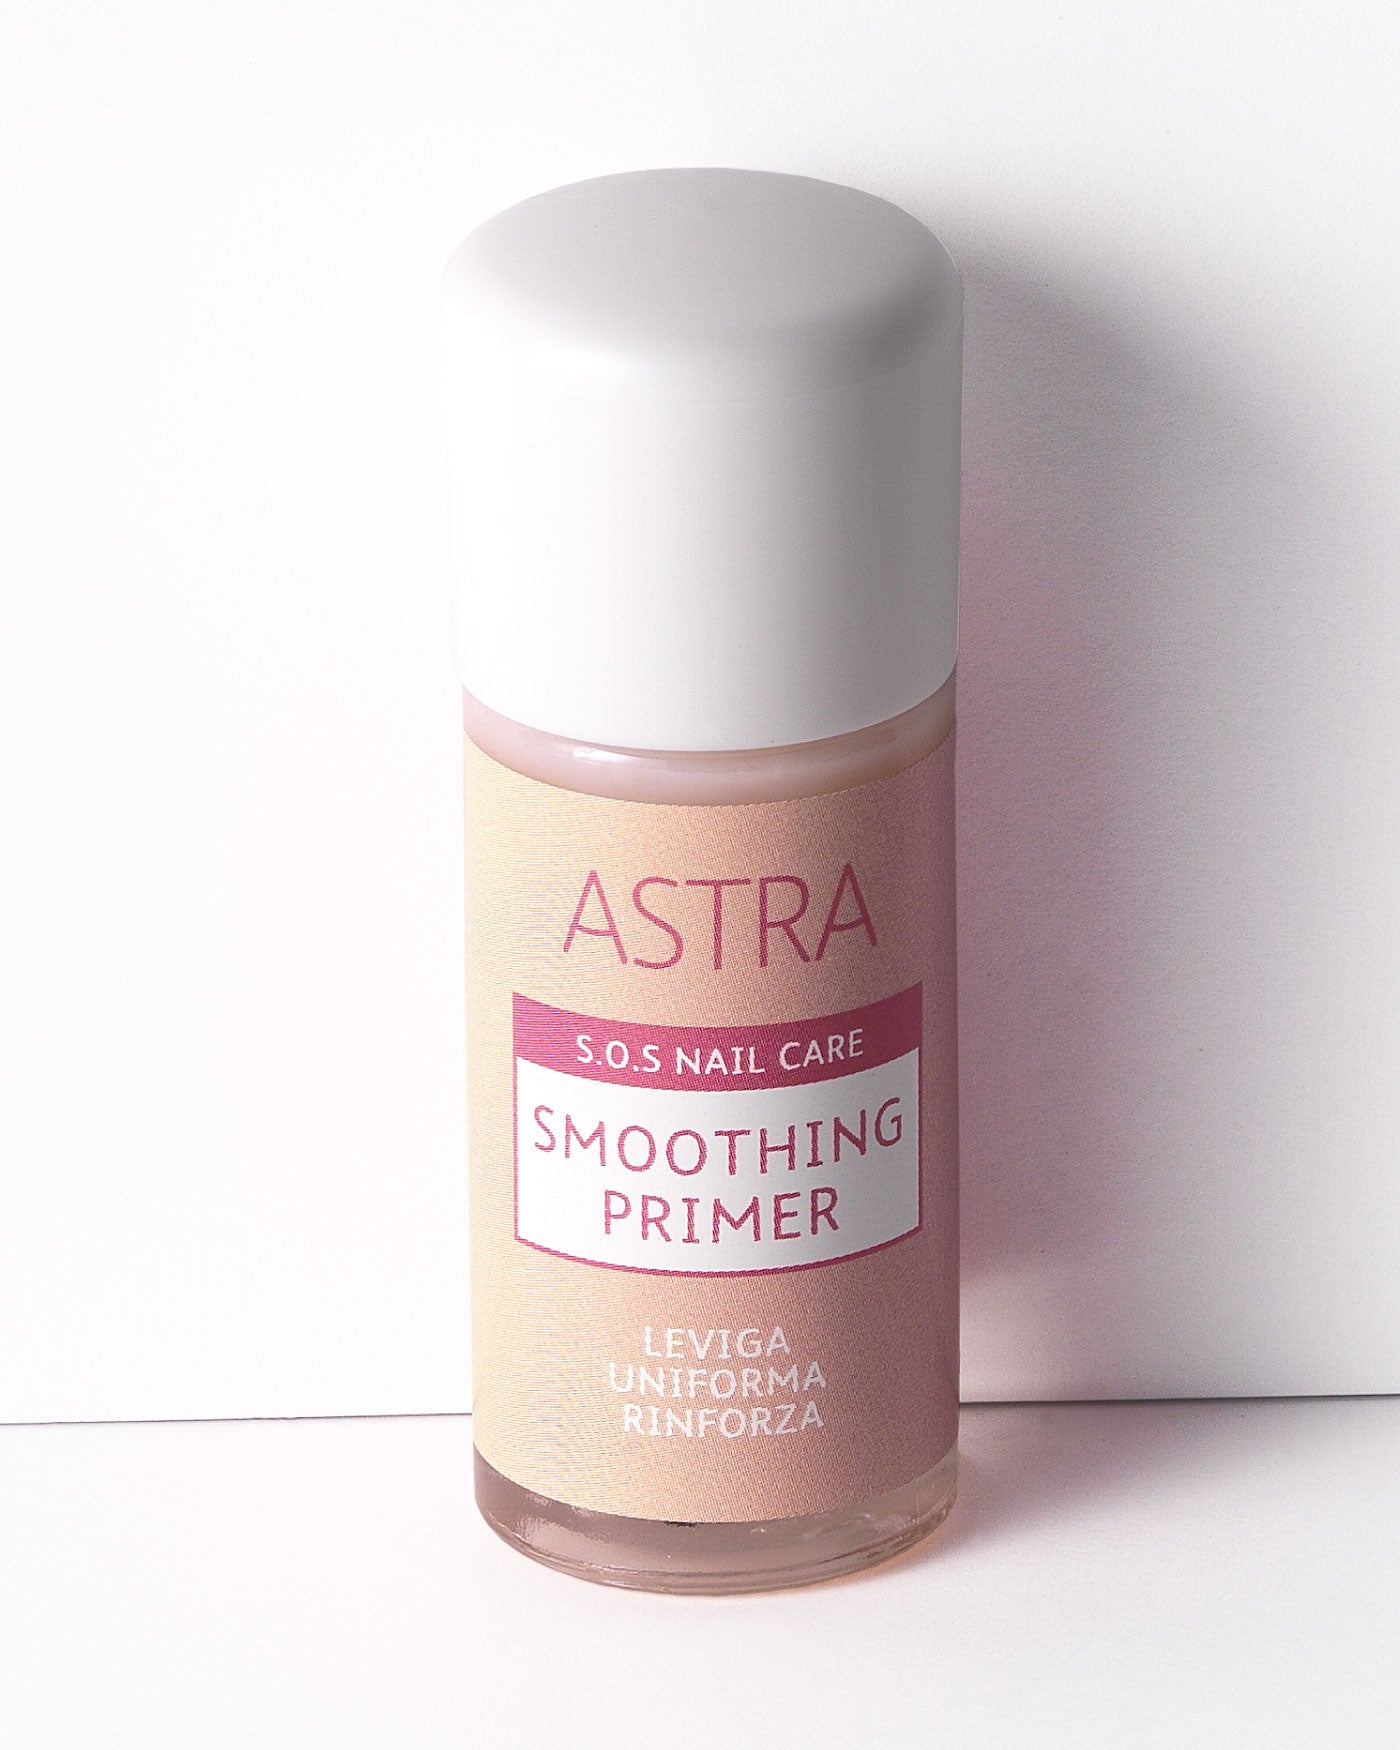 S.O.S NAIL CARE -  SMOOTHING PRIMER - Promozioni - Astra Make-Up